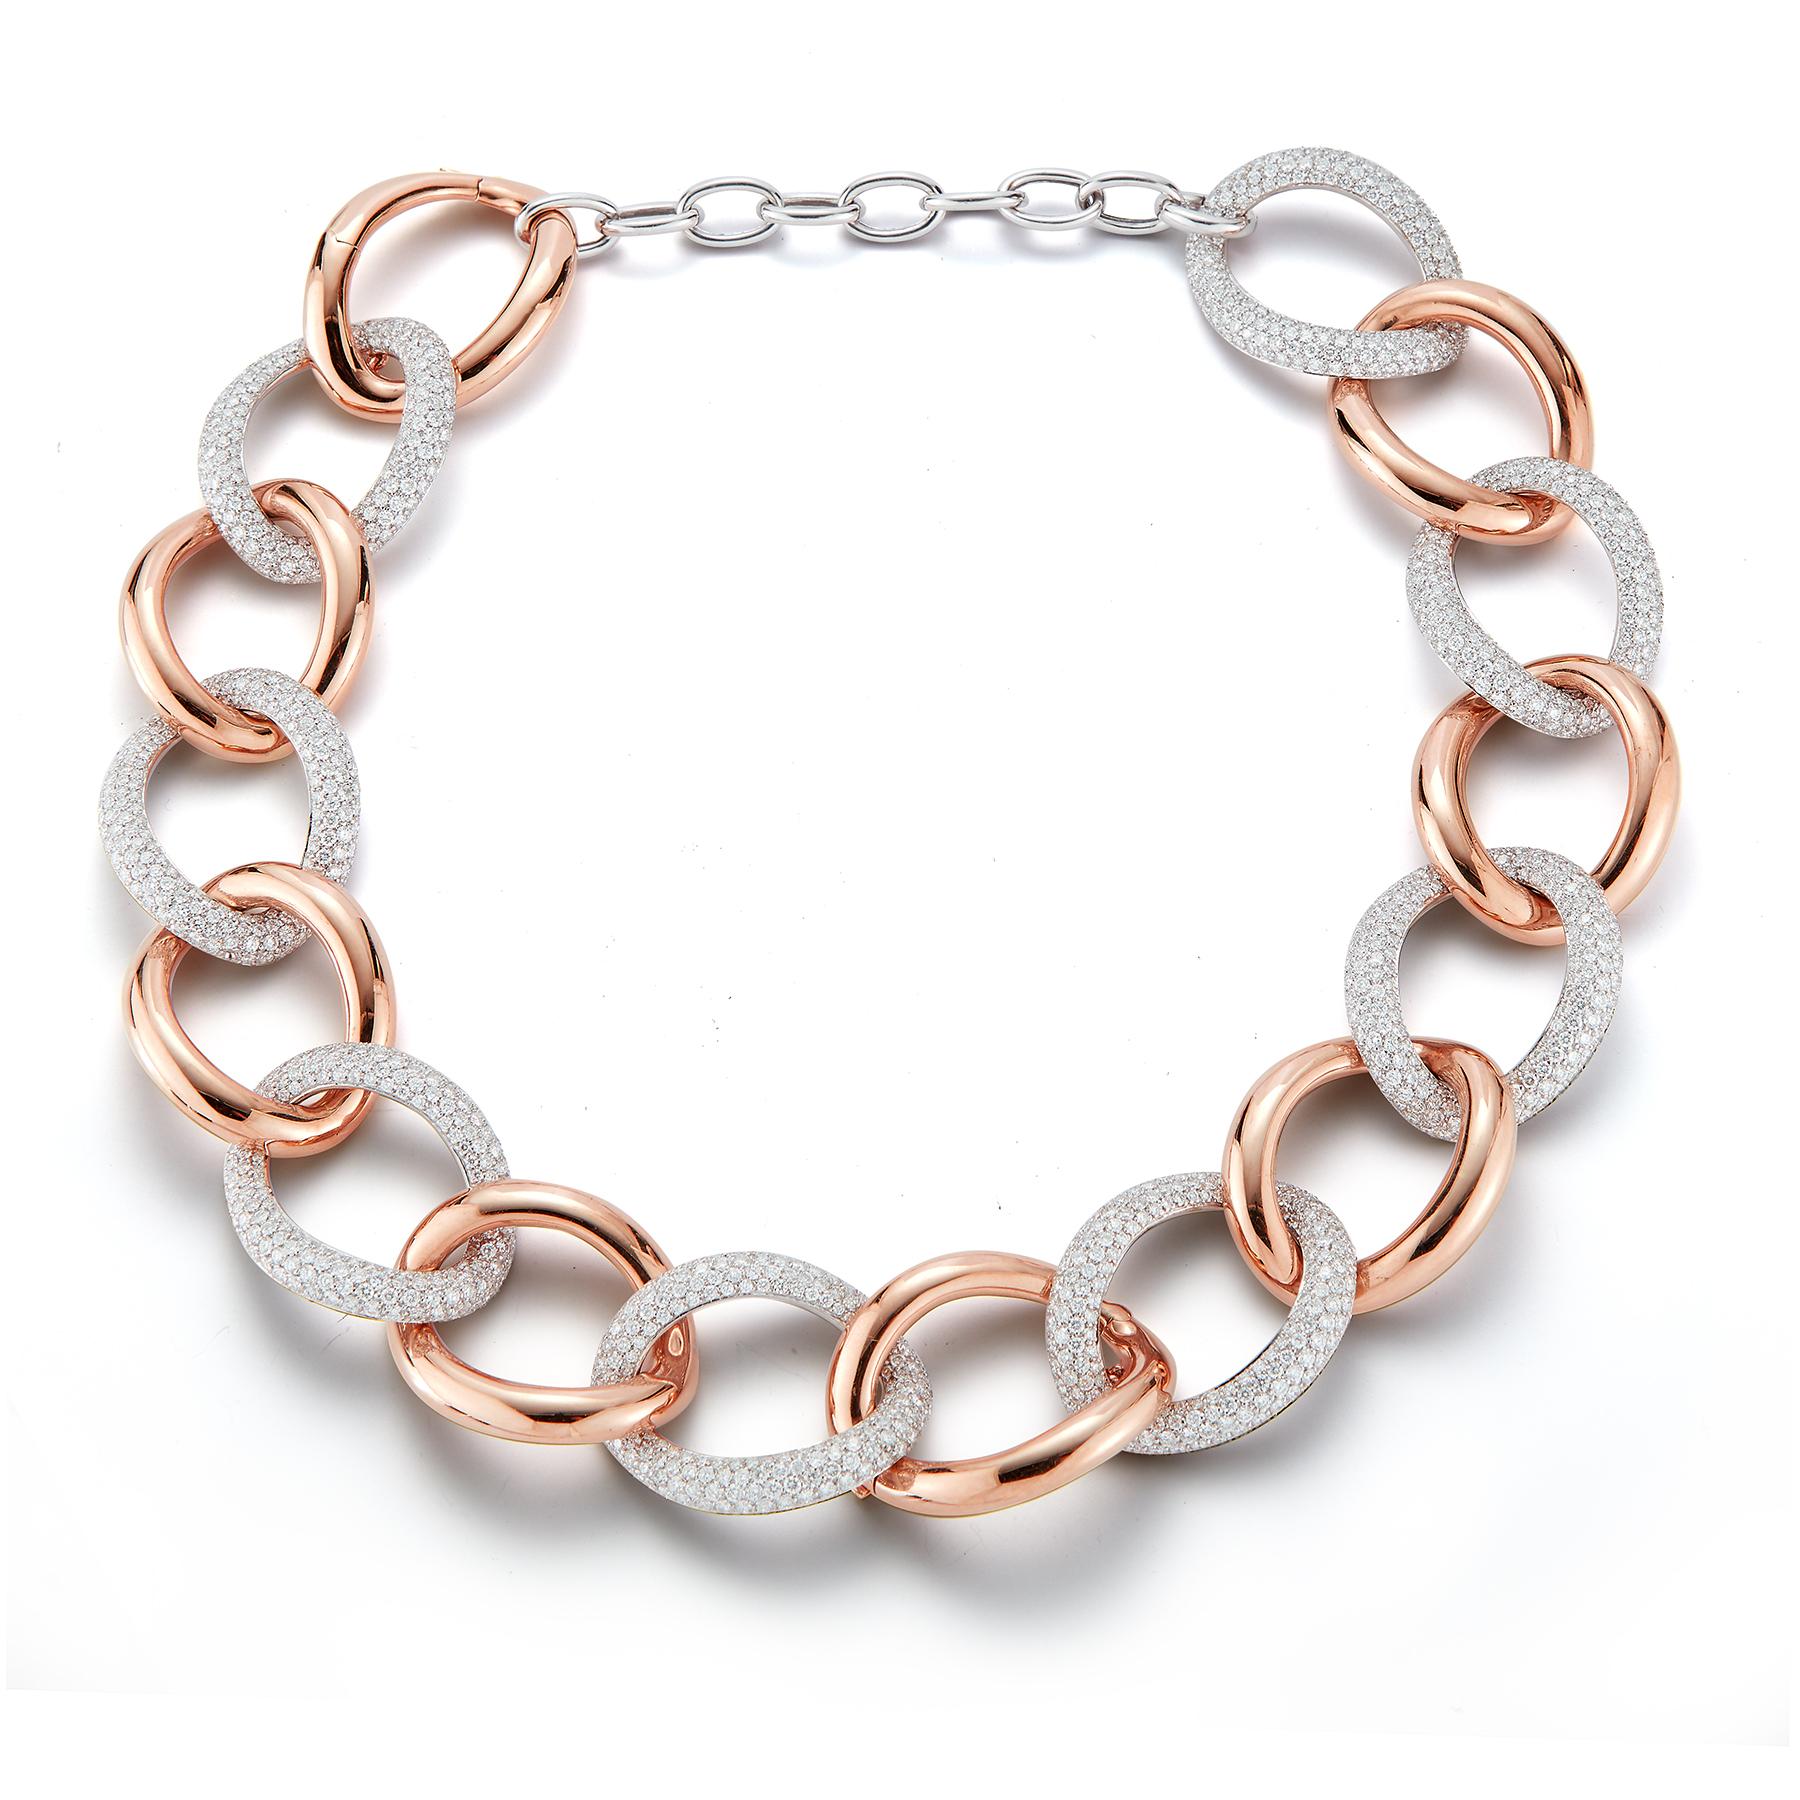 Magnificent 18K Interlocking Loop Necklace with 8 Smooth Pink Gold Loops Embracing 8 Dazzling Diamond-Laden Loops of 1,424 stones.